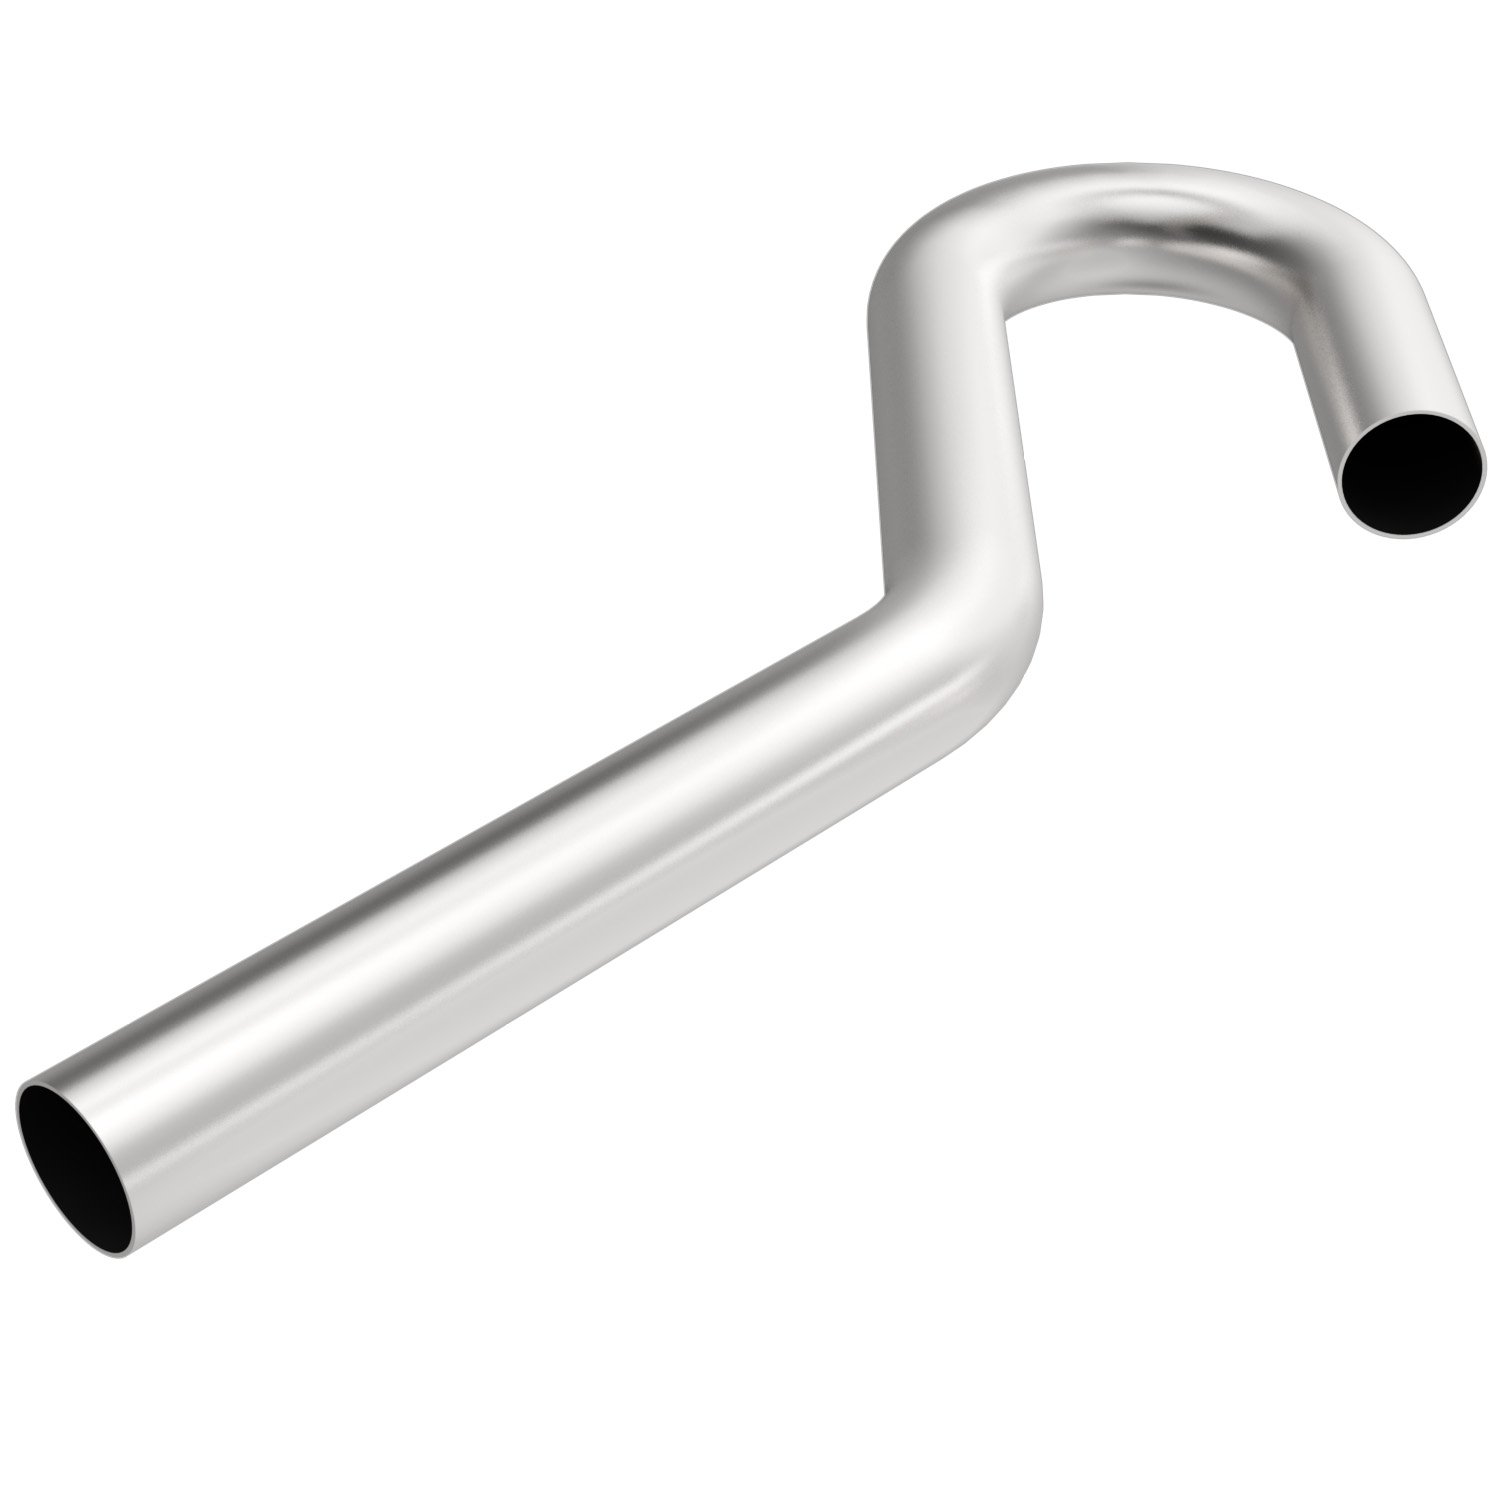 Stainless Steel 3-in-1 Transition Exhaust Pipes With 45°/90°/180°